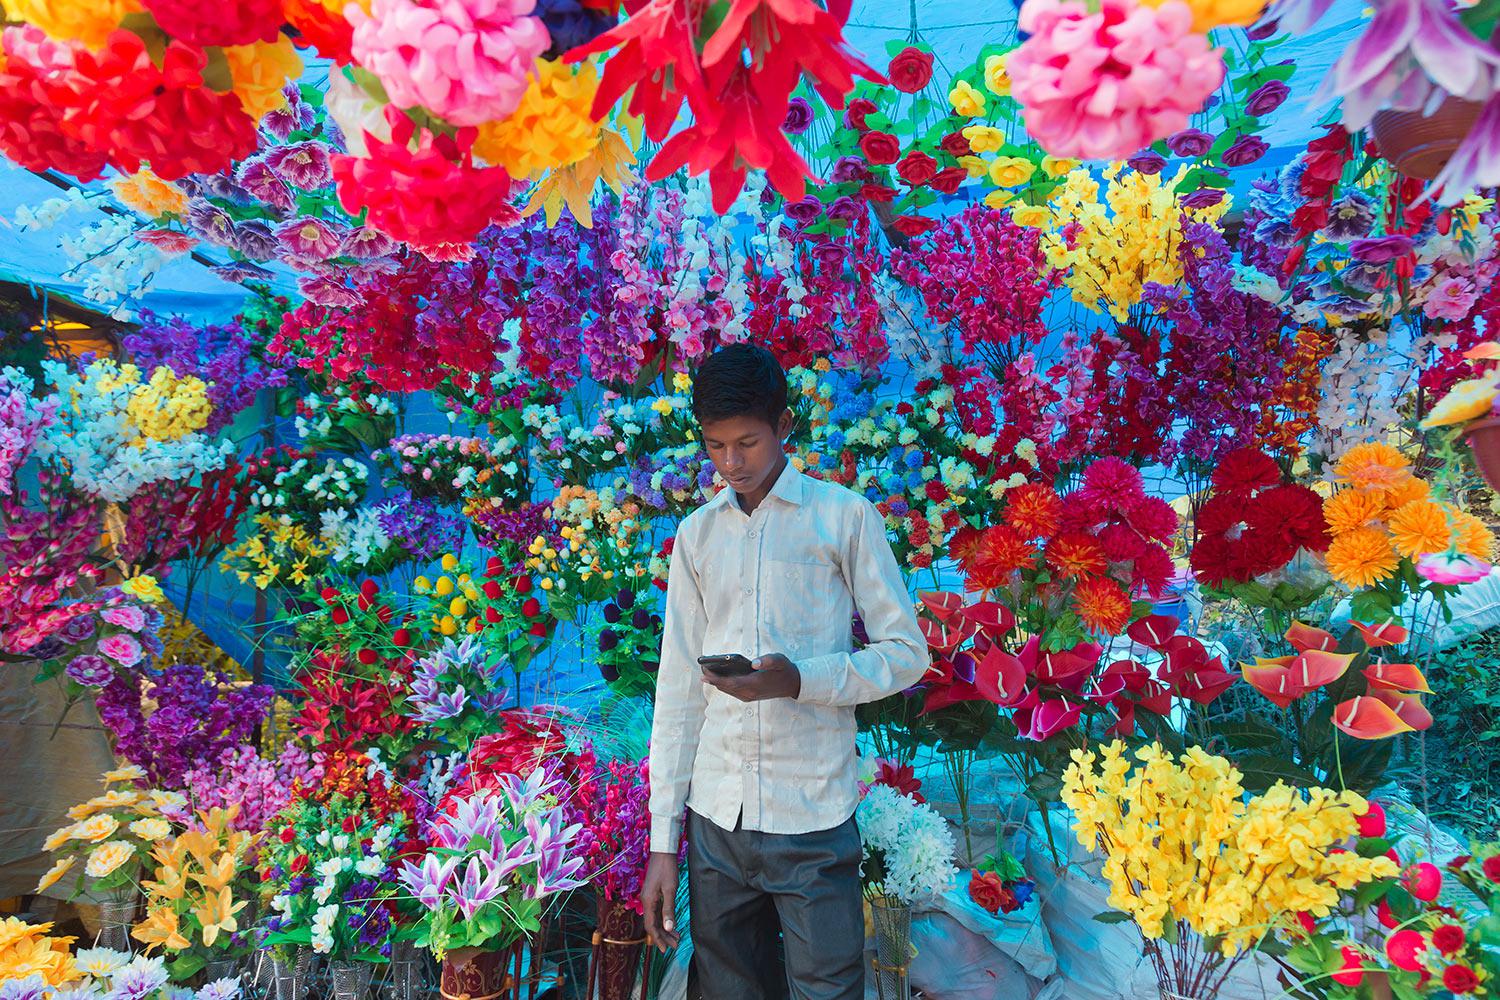 FILE - In this Sept. 16, 2018, file photo,  an Indian youth checks his phone as he sells plastic flowers at a local fair in Dharmsala, India. (AP Photo/Ashwini Bhatia, File)